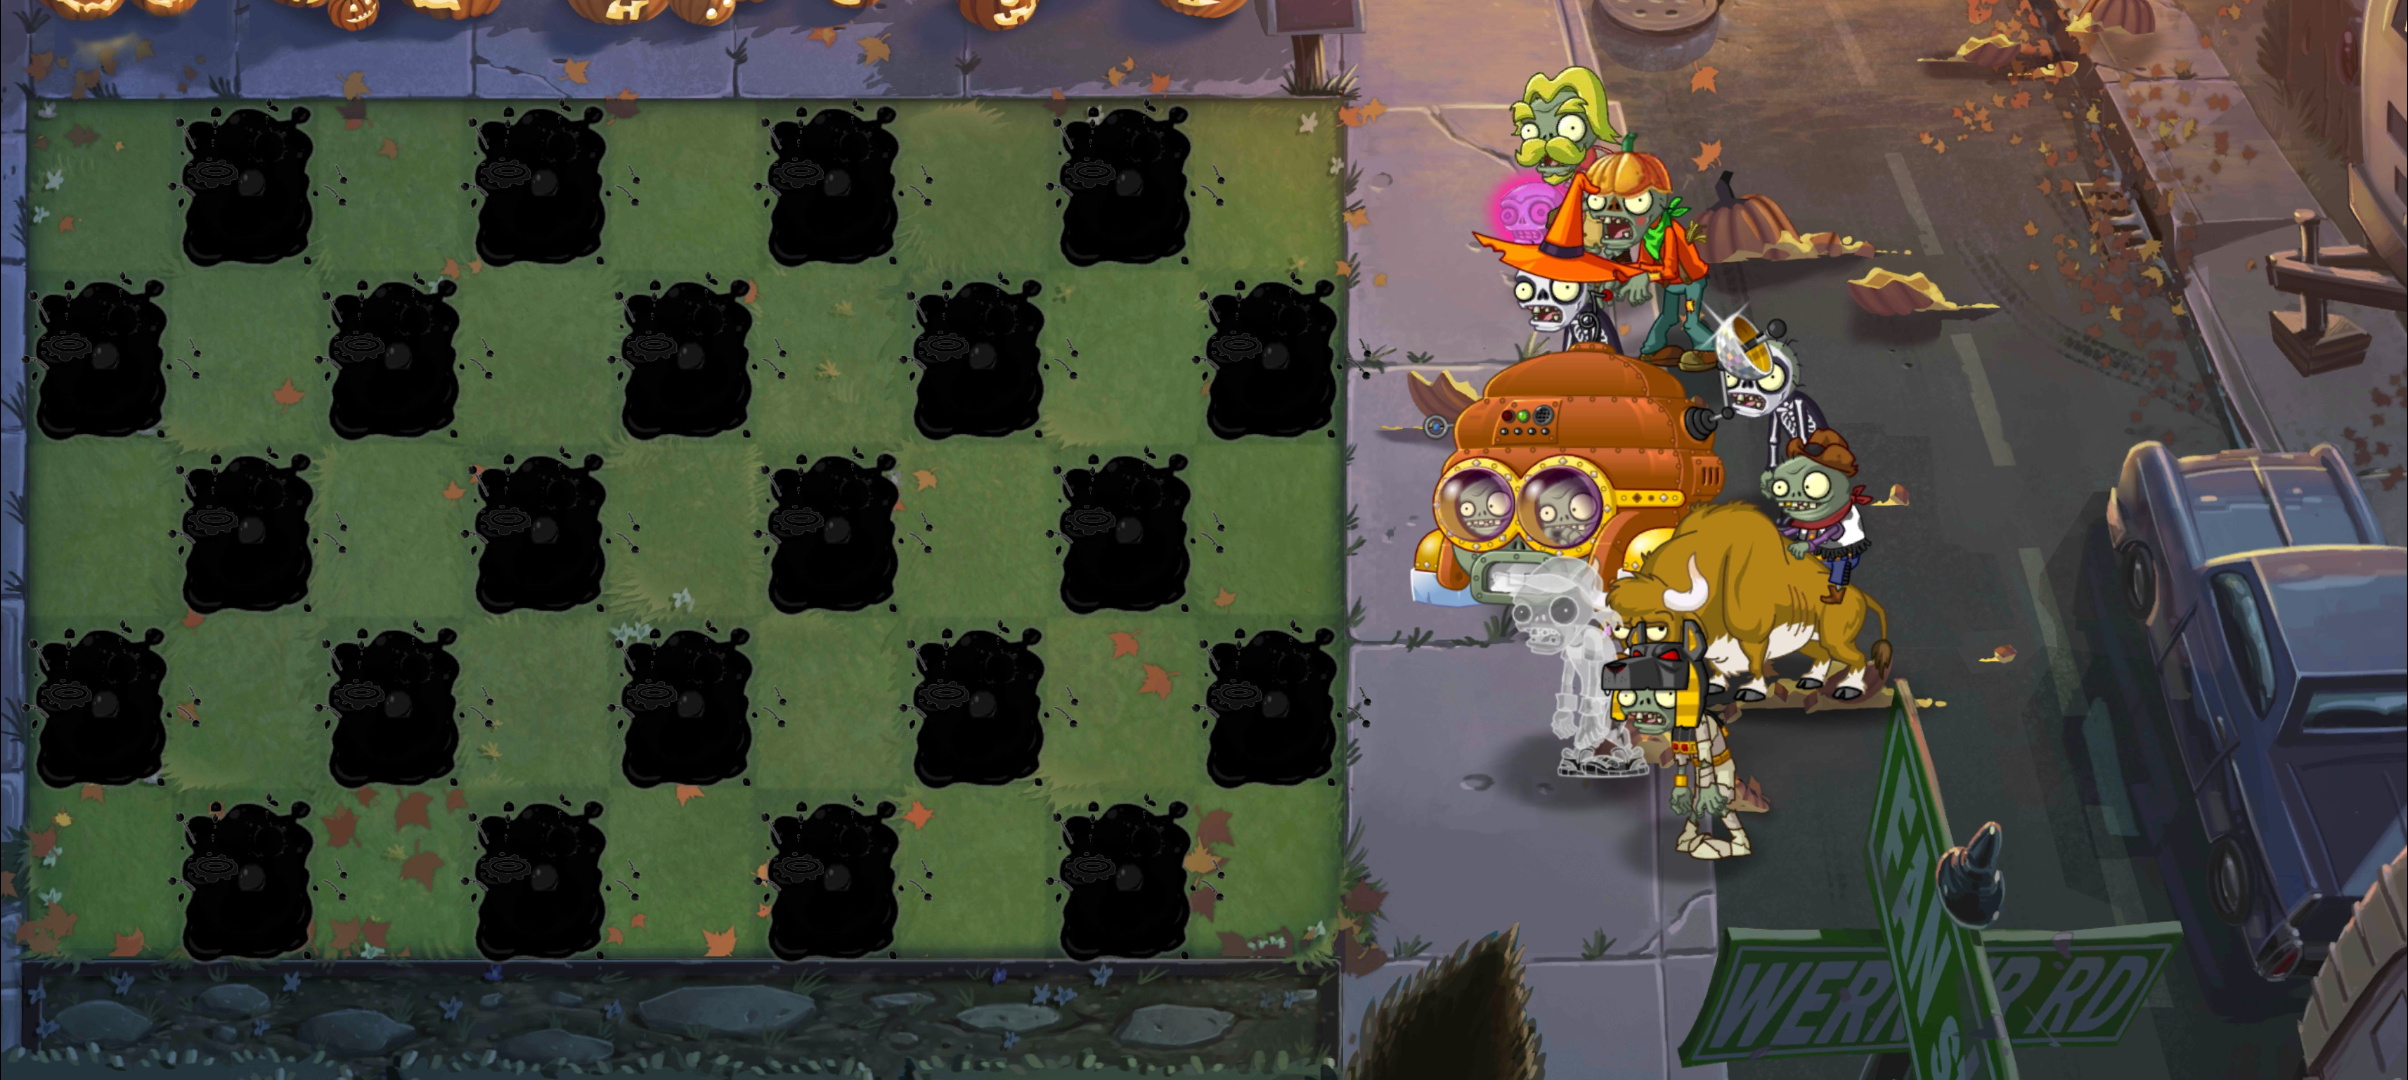 Plants vs. Zombies 2 goes medieval on your grass